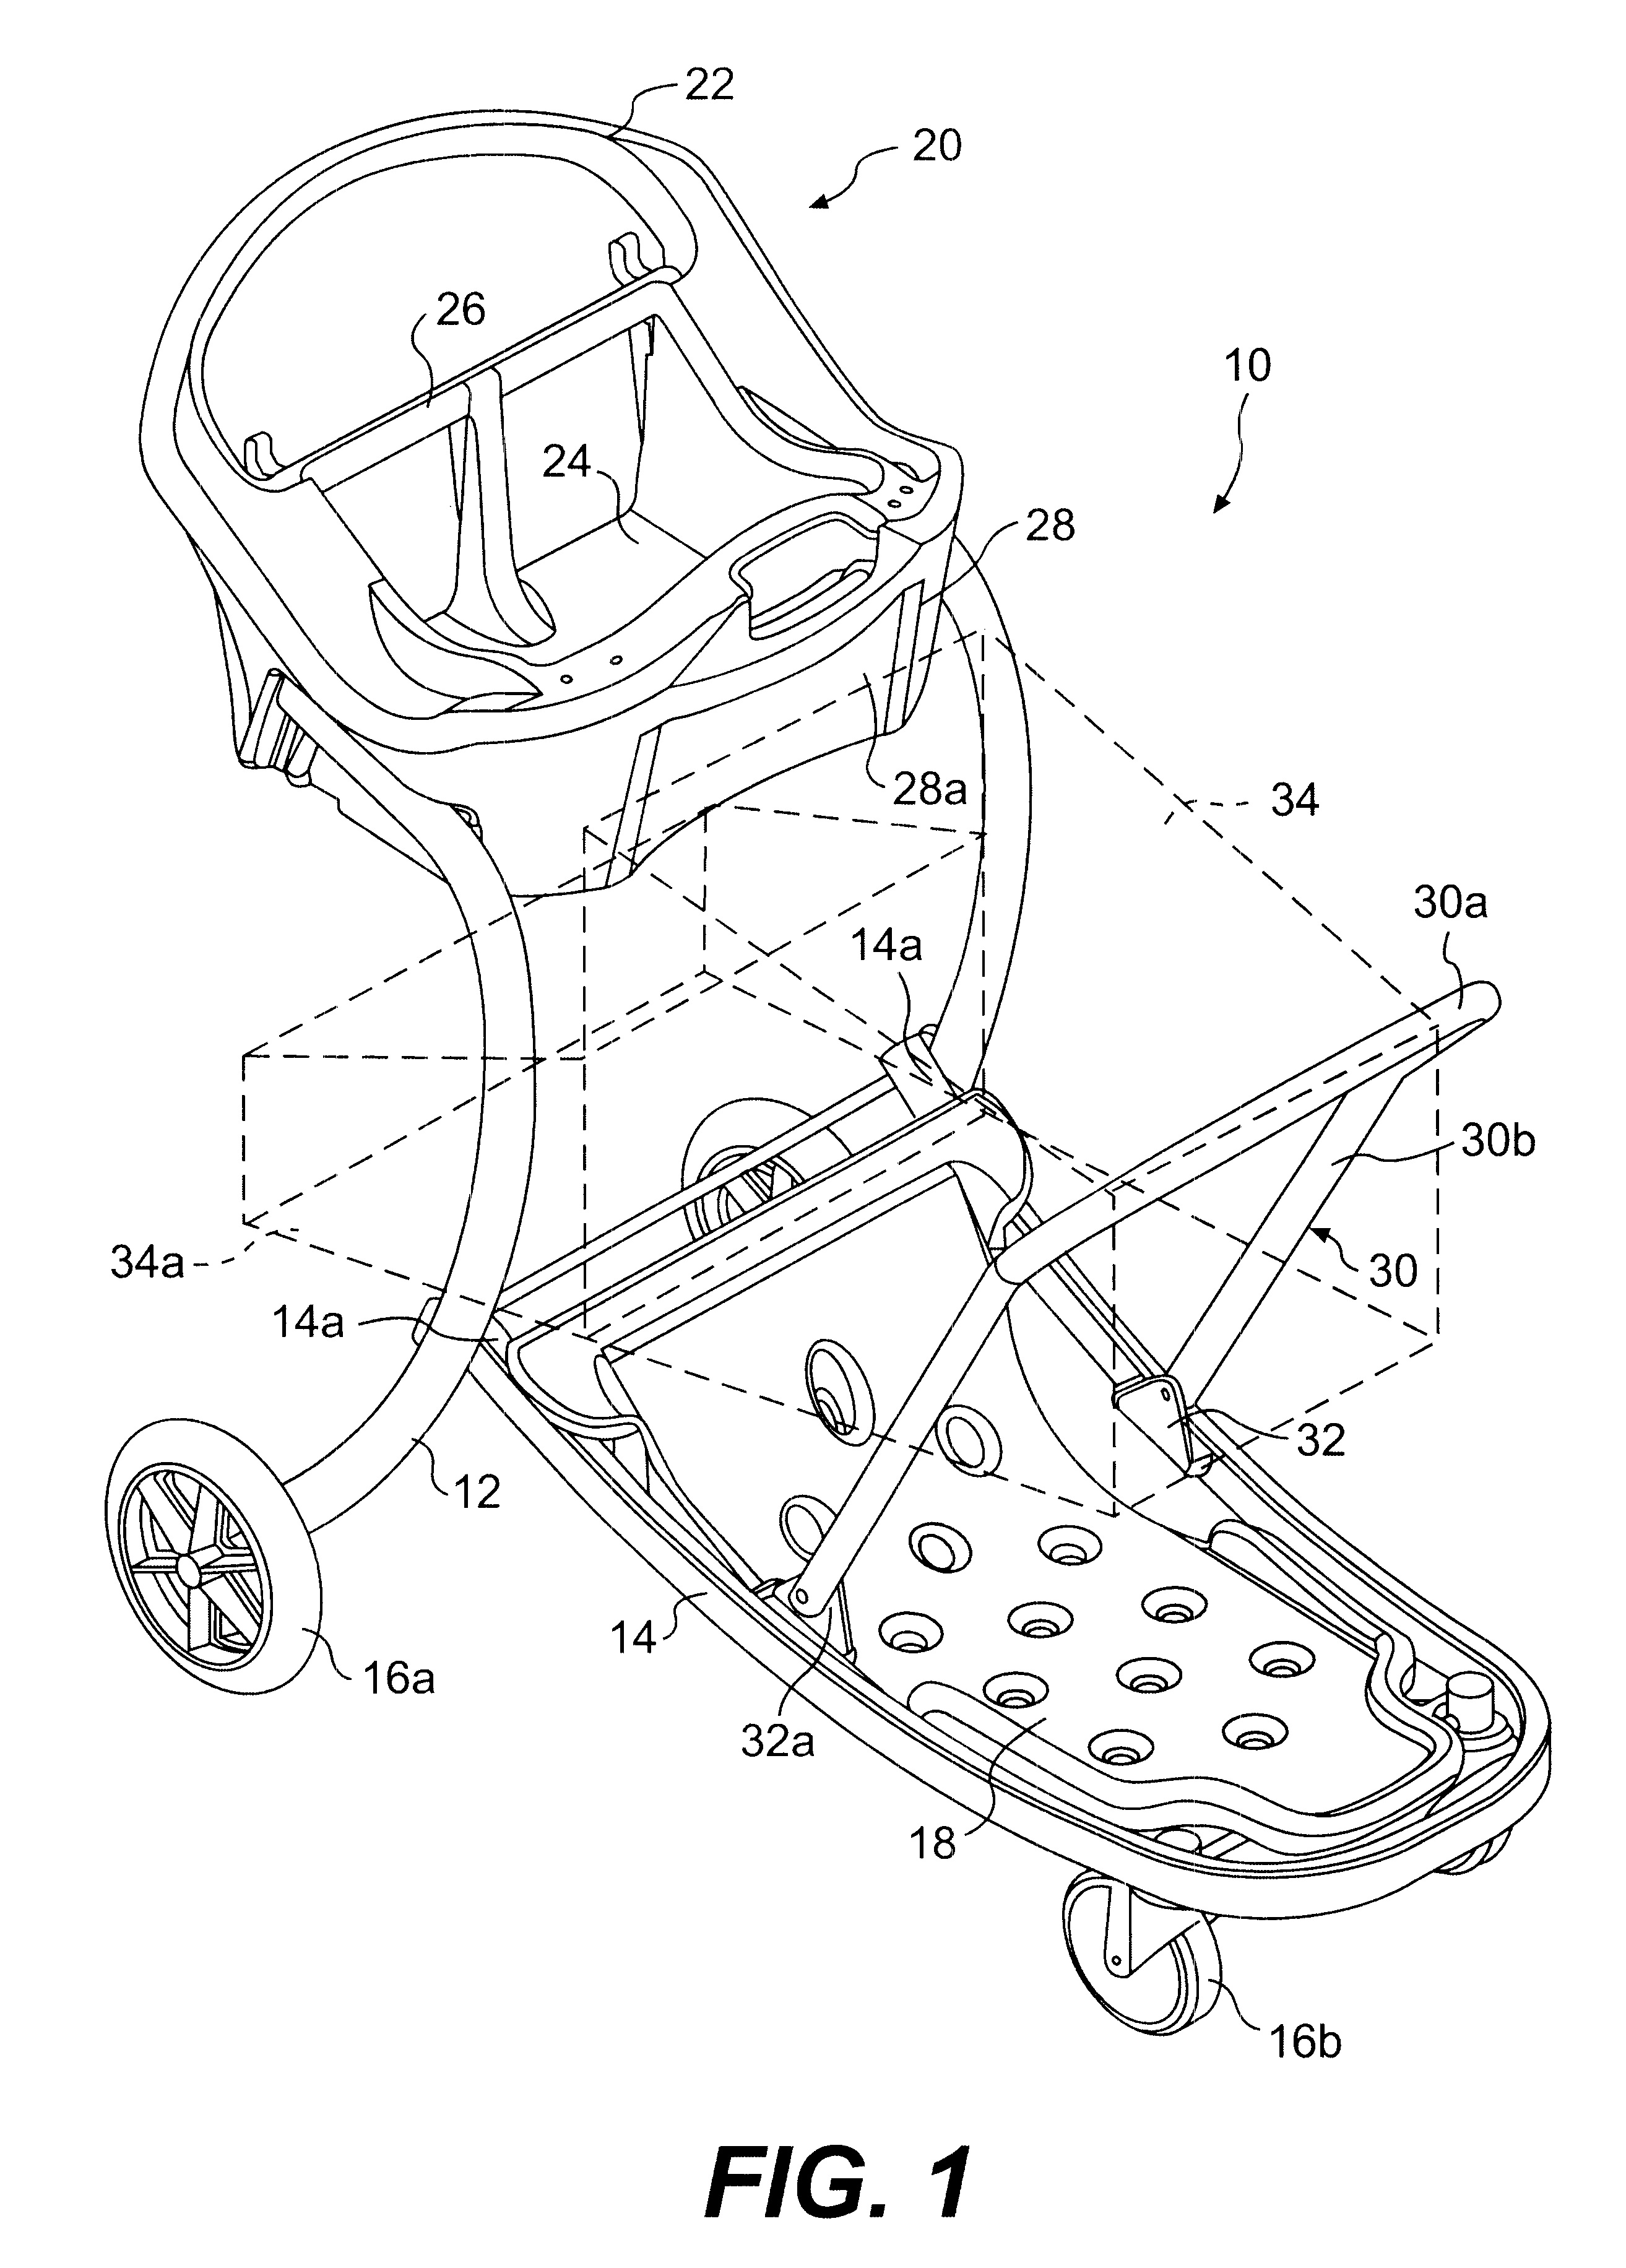 Cart with collapsible receptacle and method of use